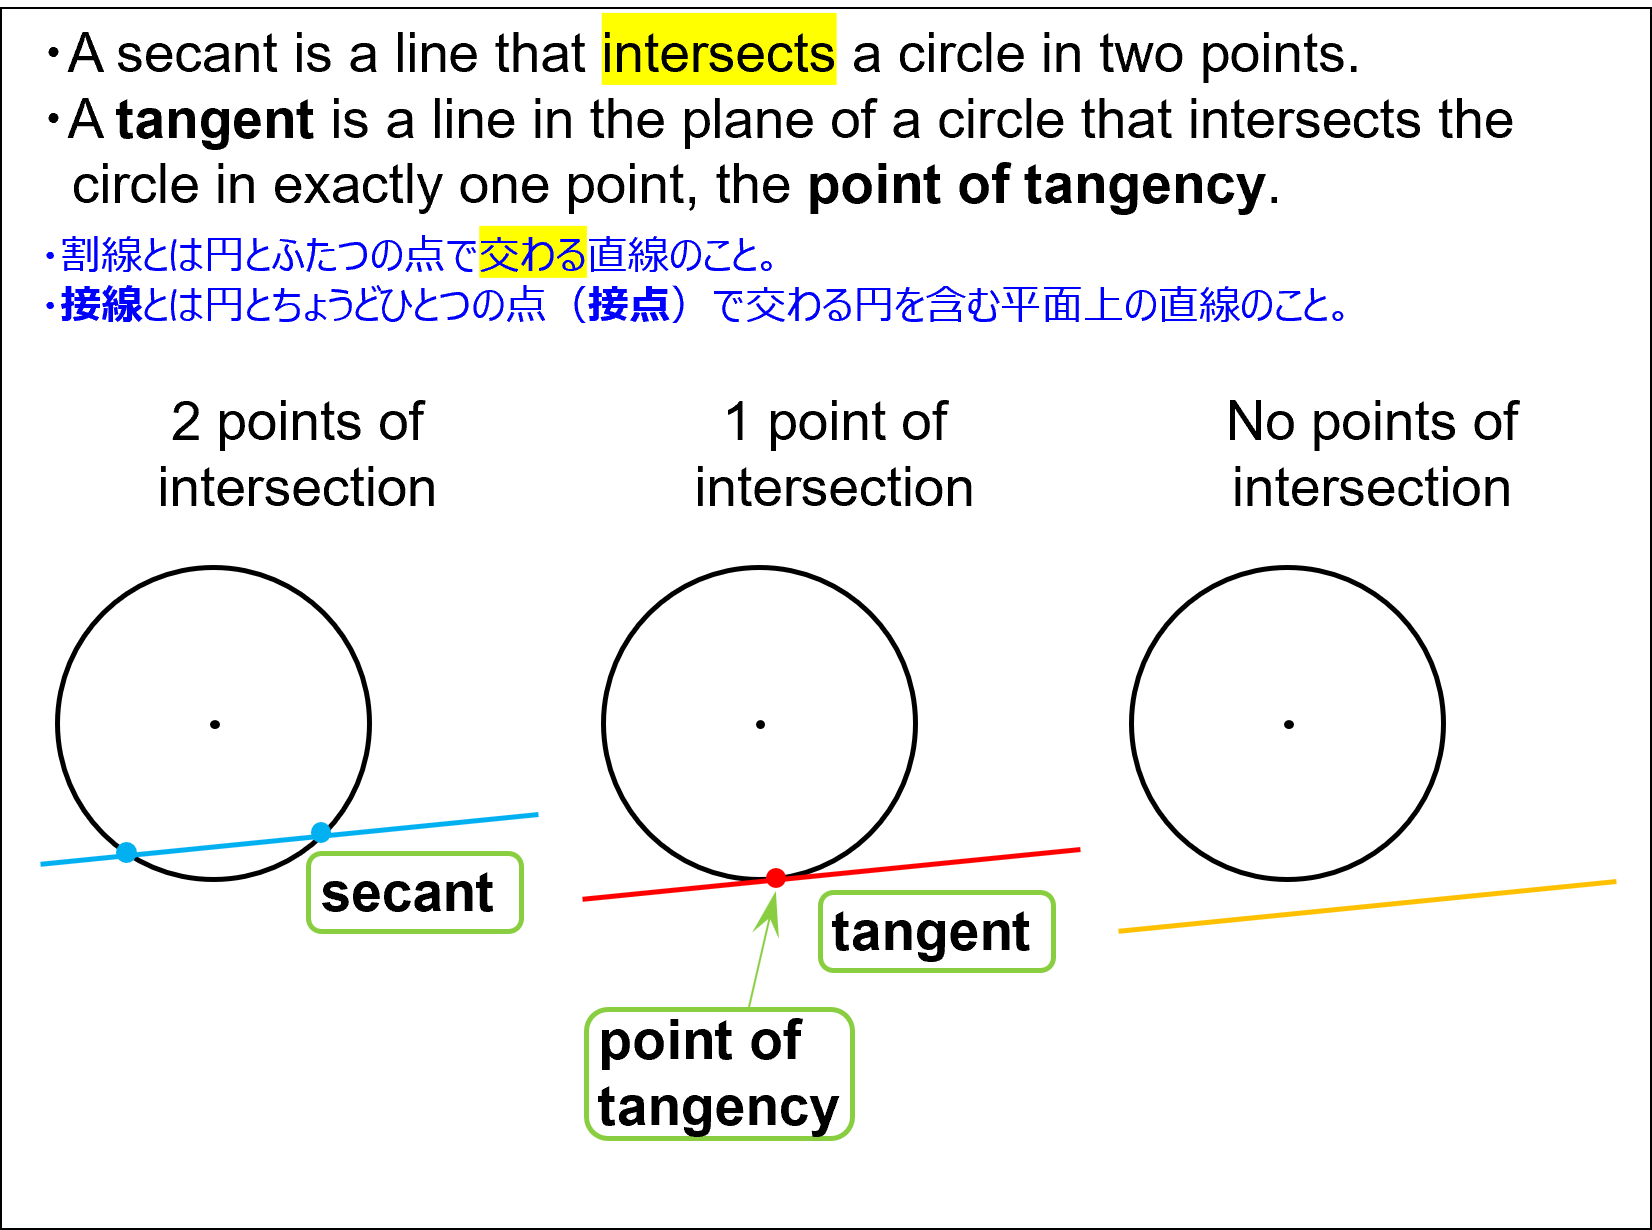 Definition of tangent